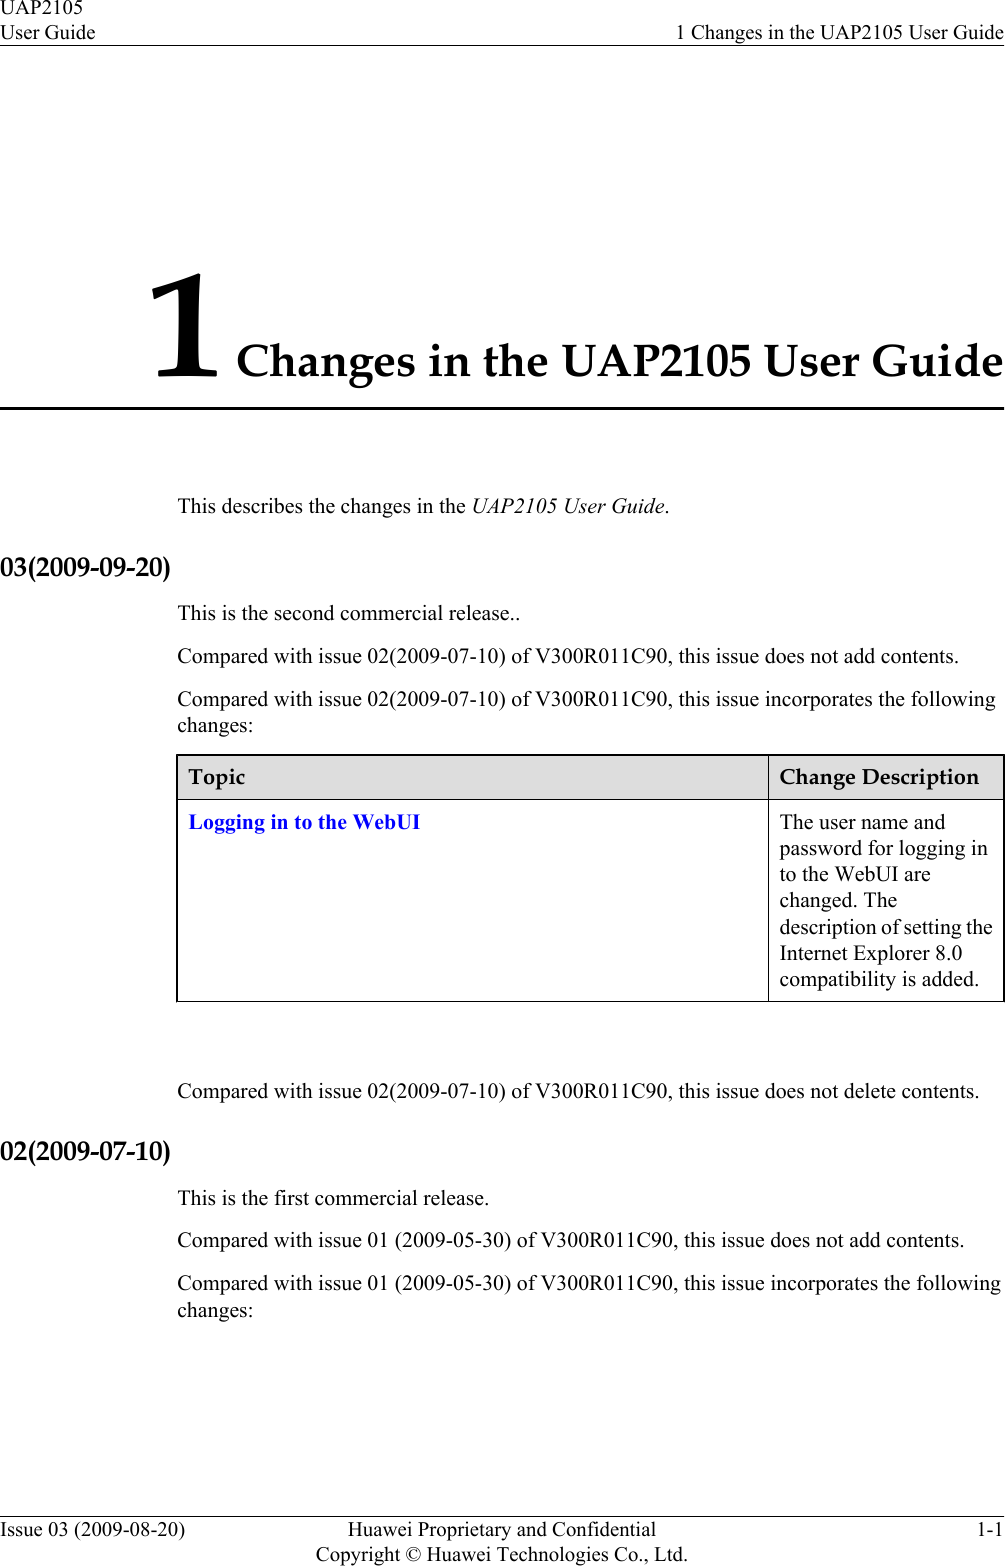 1 Changes in the UAP2105 User GuideThis describes the changes in the UAP2105 User Guide.03(2009-09-20)This is the second commercial release..Compared with issue 02(2009-07-10) of V300R011C90, this issue does not add contents.Compared with issue 02(2009-07-10) of V300R011C90, this issue incorporates the followingchanges:Topic Change DescriptionLogging in to the WebUI The user name andpassword for logging into the WebUI arechanged. Thedescription of setting theInternet Explorer 8.0compatibility is added. Compared with issue 02(2009-07-10) of V300R011C90, this issue does not delete contents.02(2009-07-10)This is the first commercial release.Compared with issue 01 (2009-05-30) of V300R011C90, this issue does not add contents.Compared with issue 01 (2009-05-30) of V300R011C90, this issue incorporates the followingchanges:UAP2105User Guide 1 Changes in the UAP2105 User GuideIssue 03 (2009-08-20) Huawei Proprietary and ConfidentialCopyright © Huawei Technologies Co., Ltd.1-1